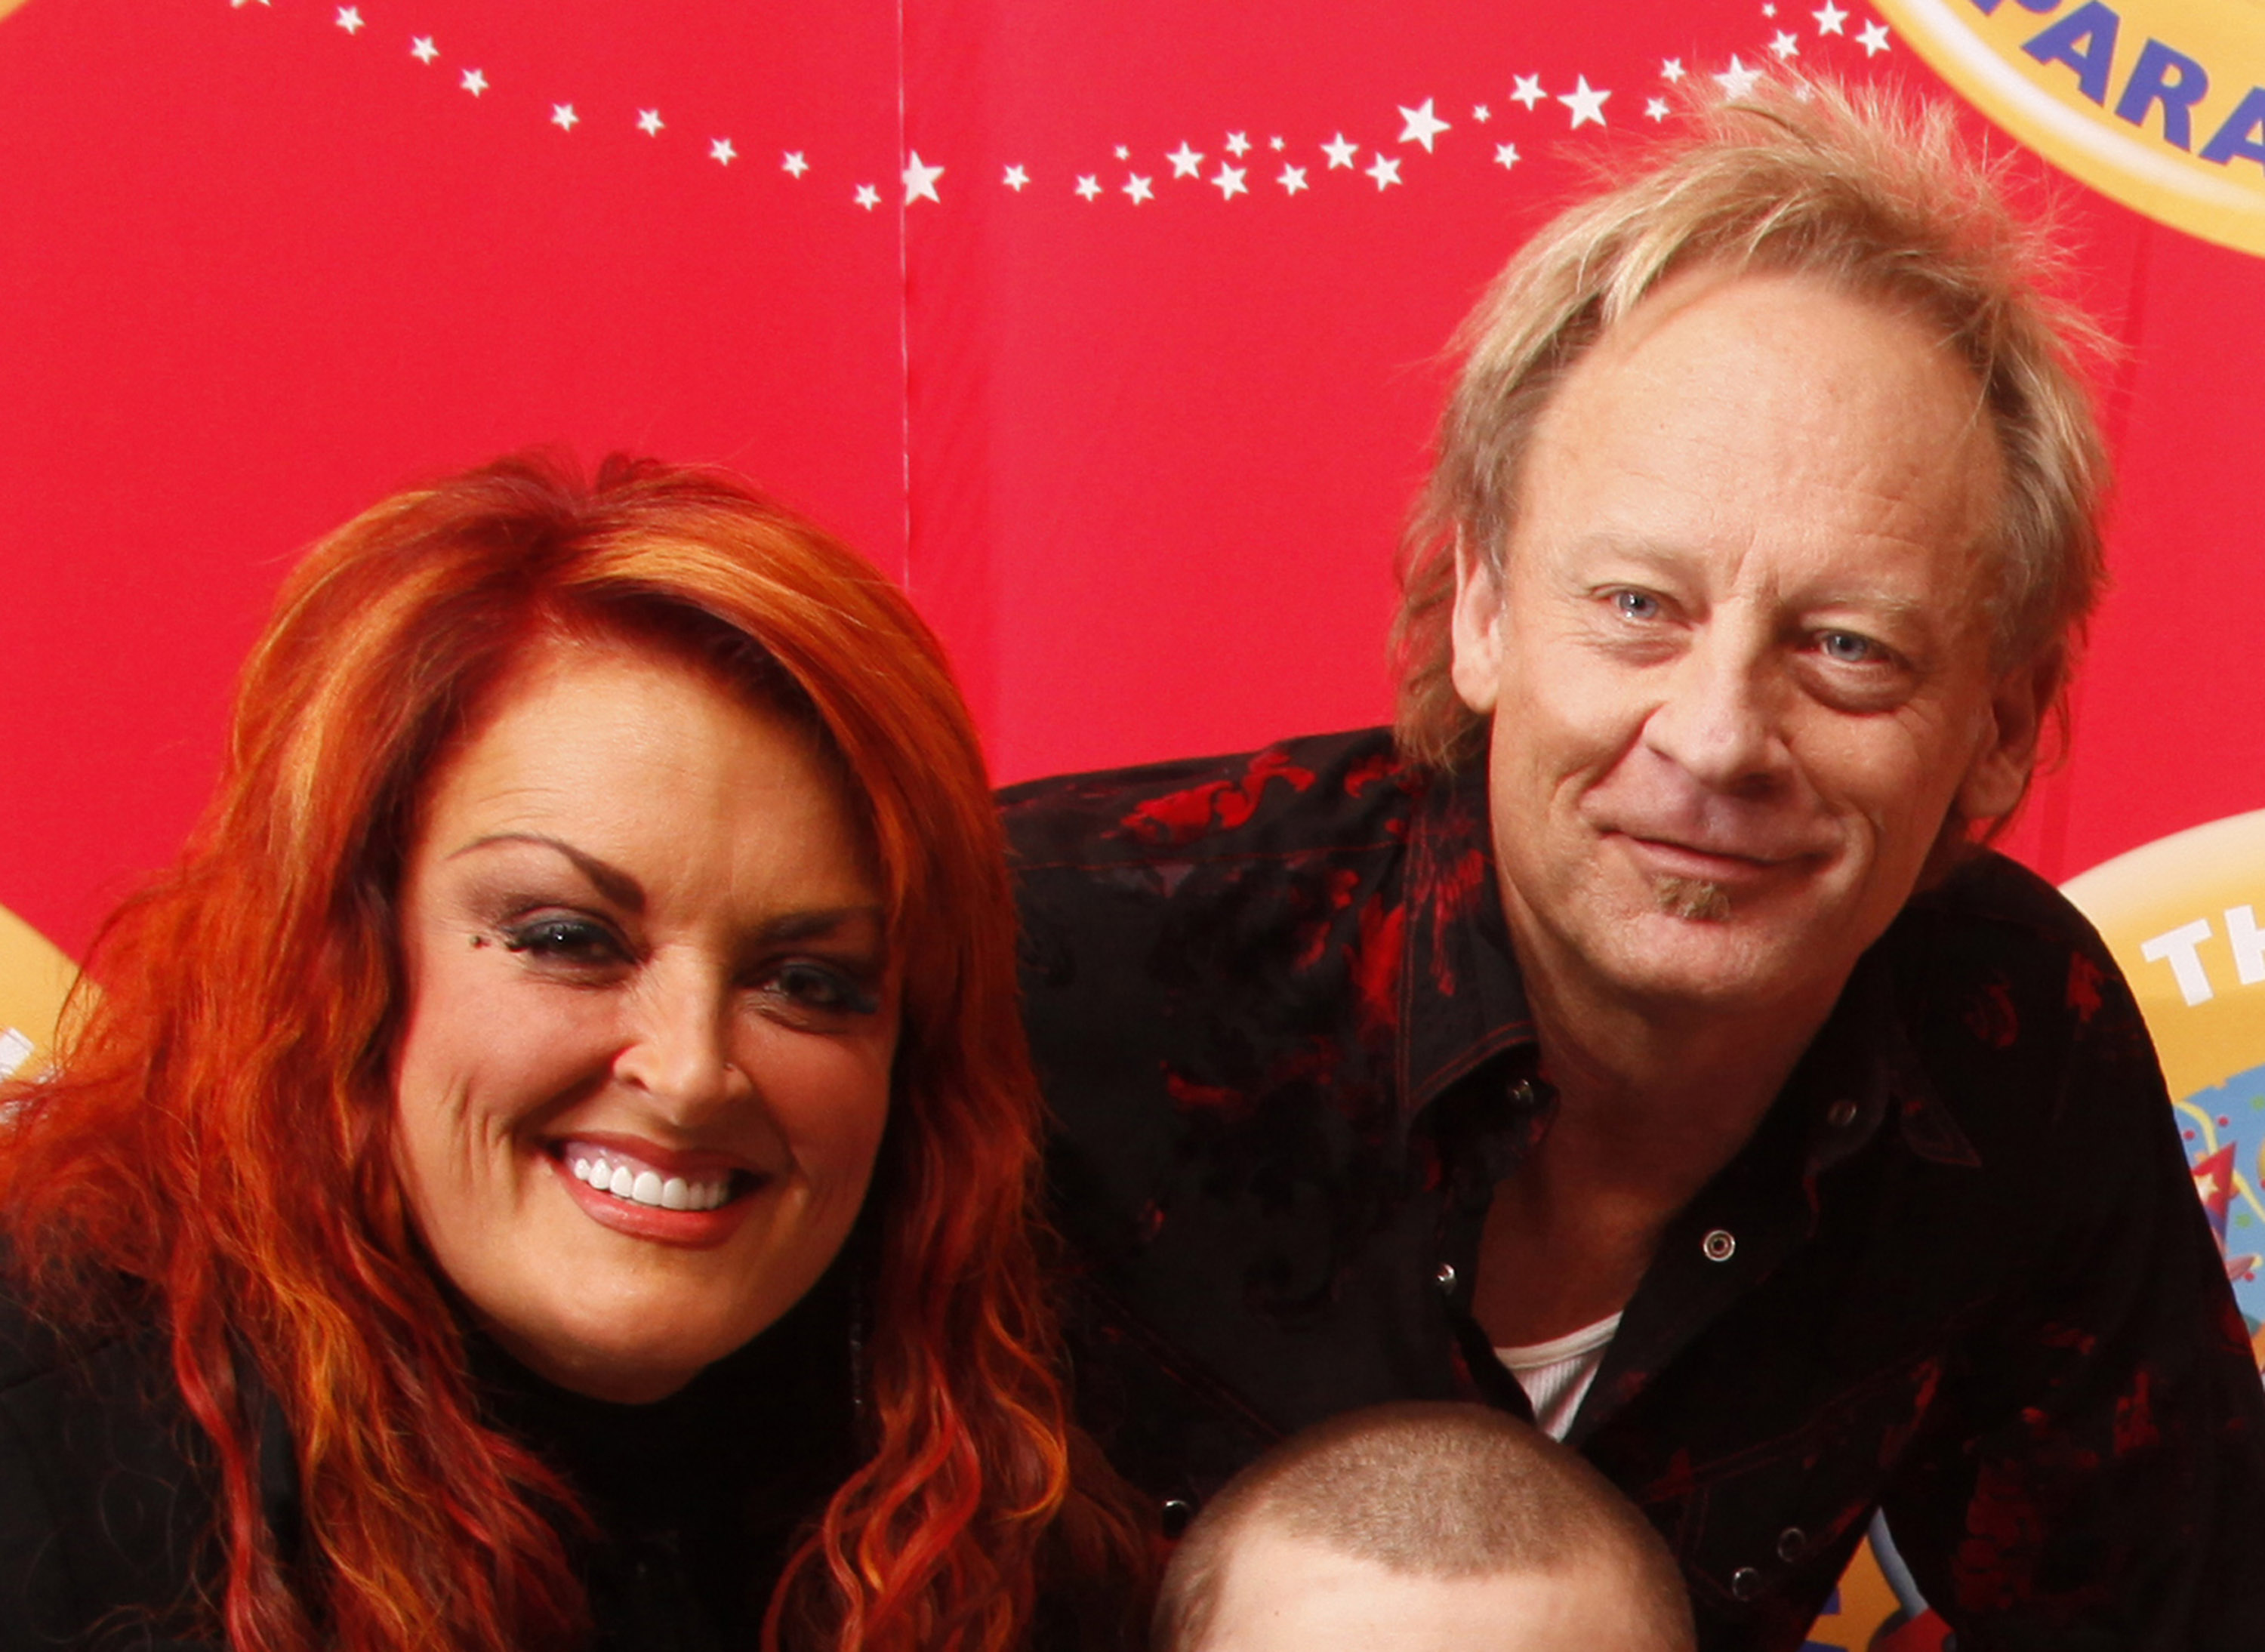 Wynonna Judd and Cactus Moser performing for Make-A-Wish kids and their families in Nashville, 2011 | Source: Getty Images